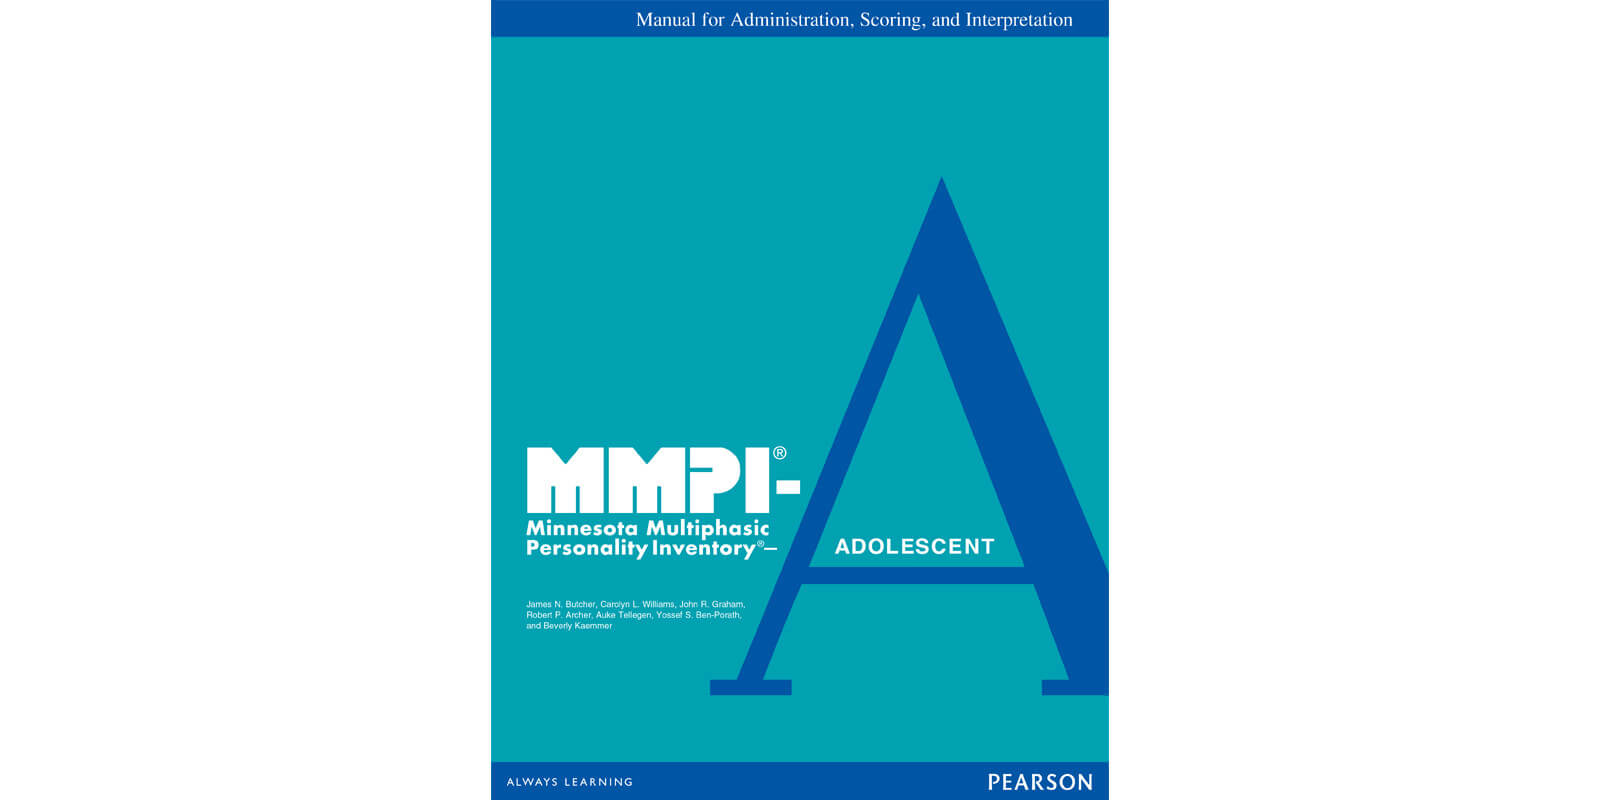 Minnesota Multiphasic Personality Inventory-Adolescent (MMPI-A) - 